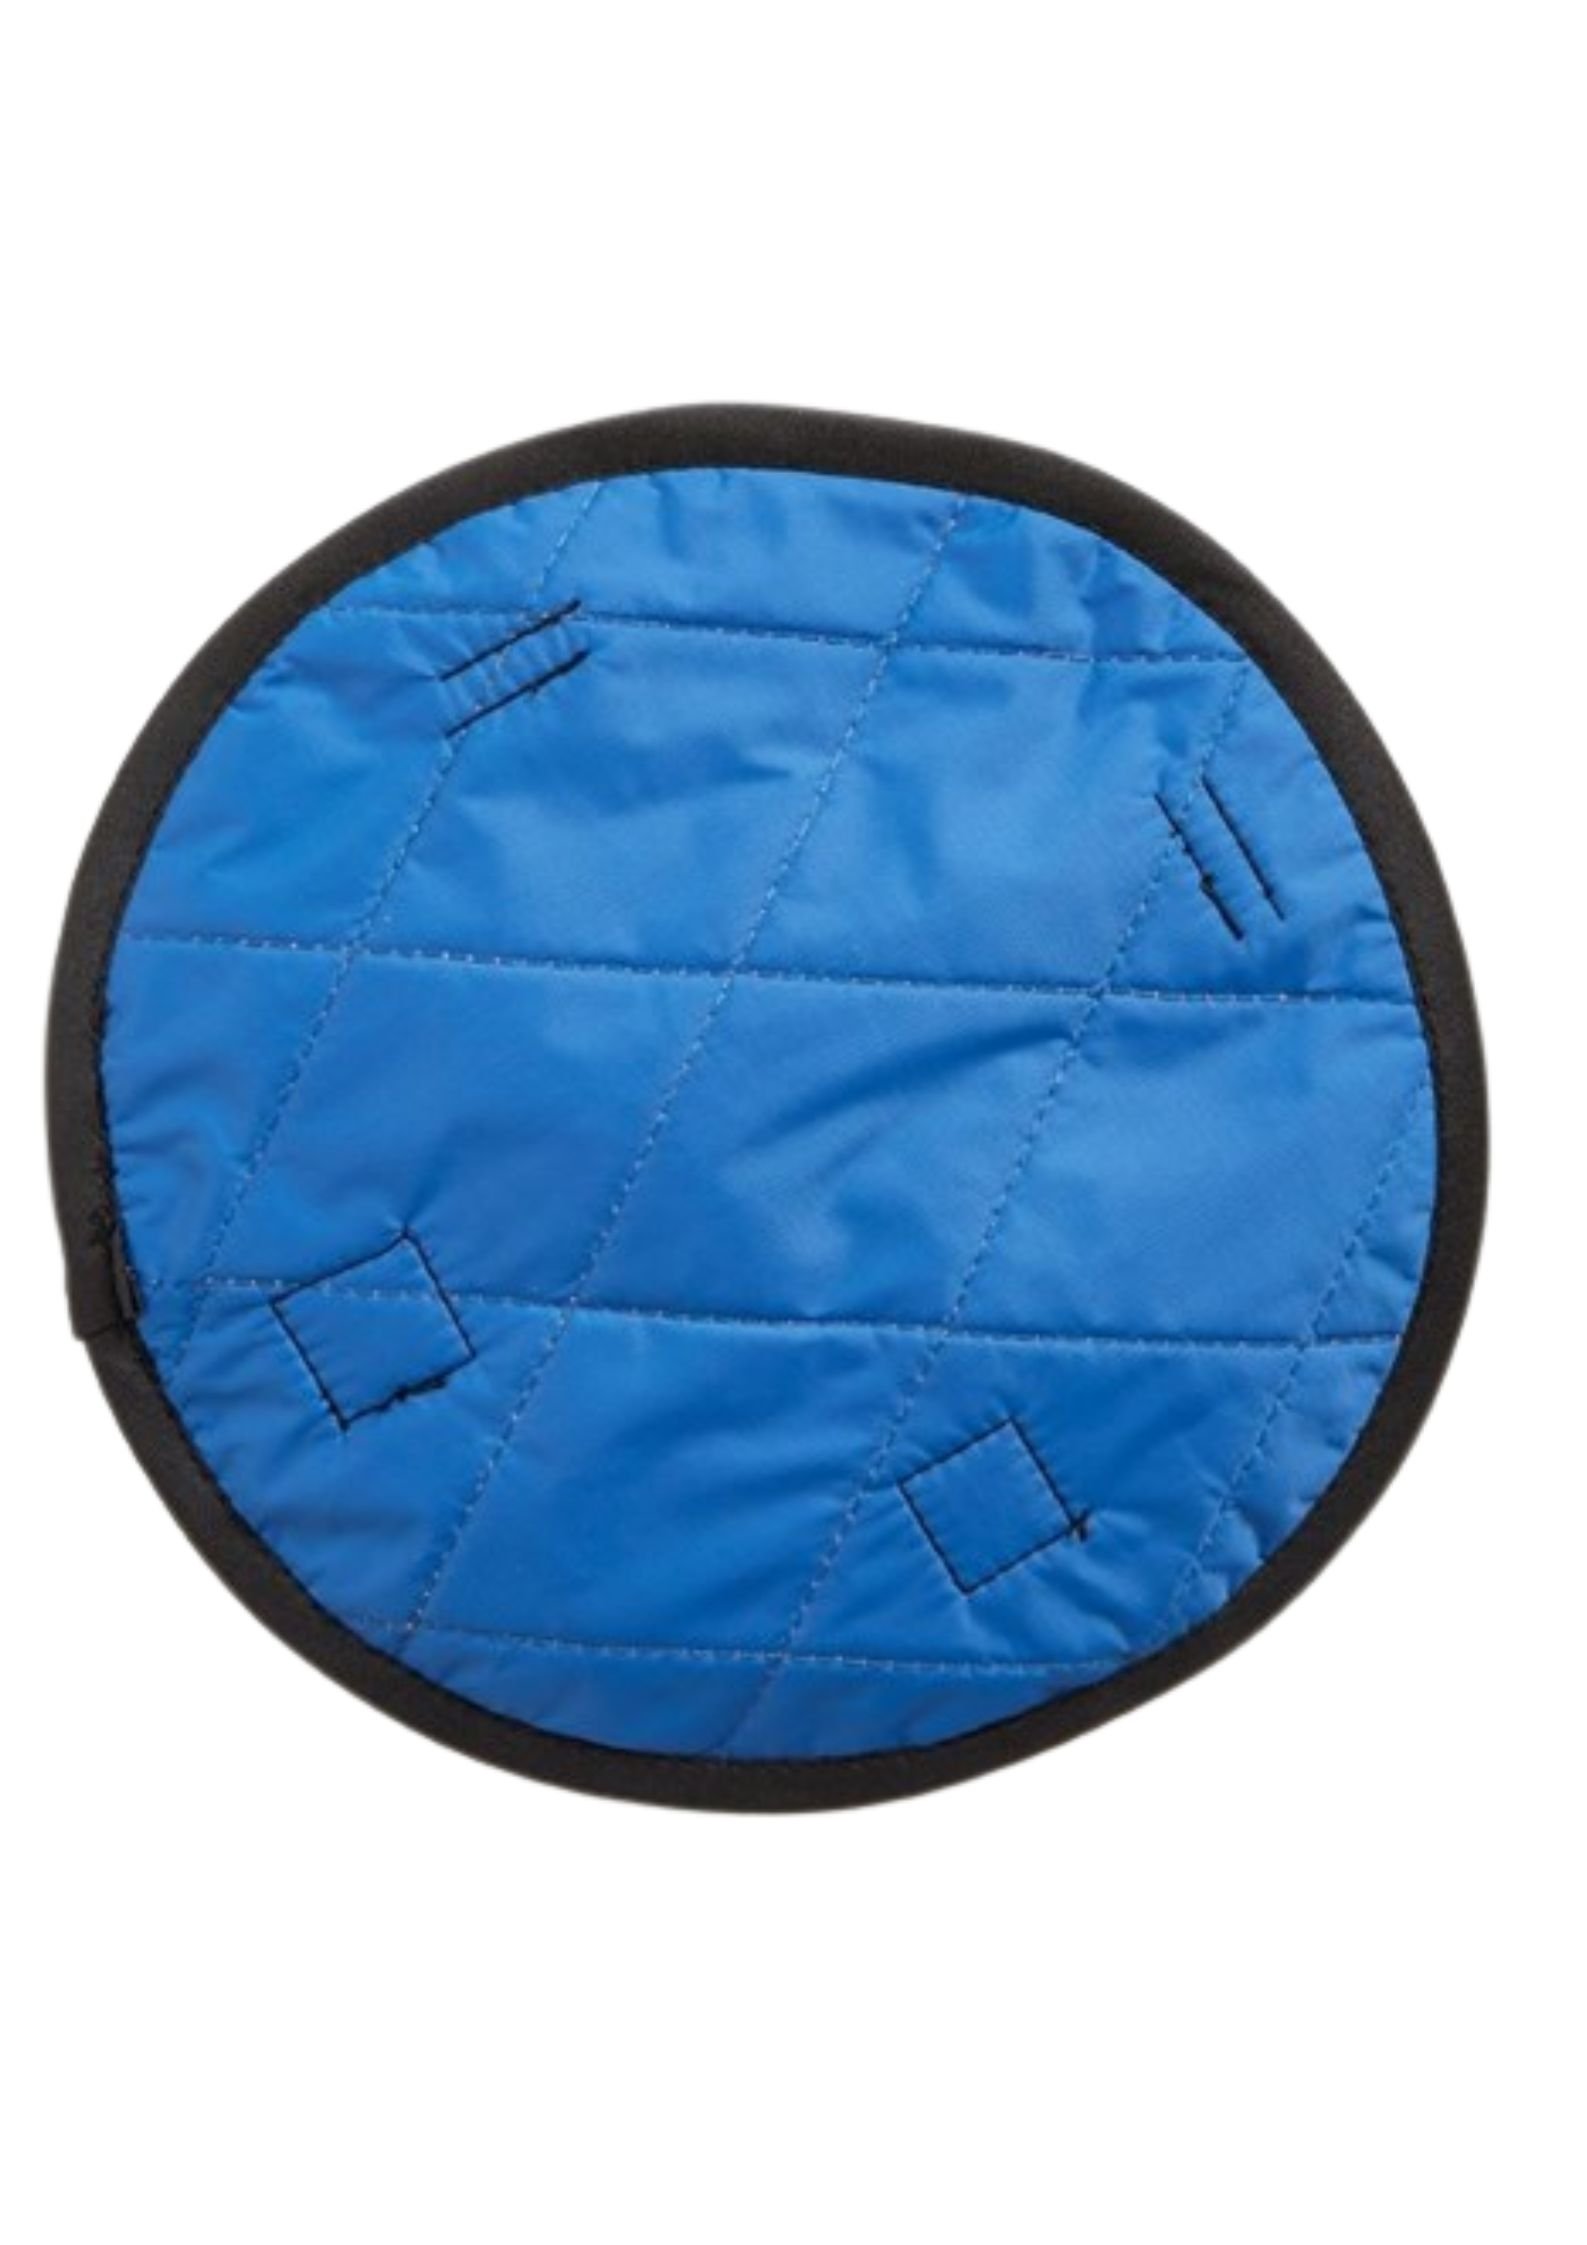 THORZT COOLING CROWN PAD TO FIT HARD HAT